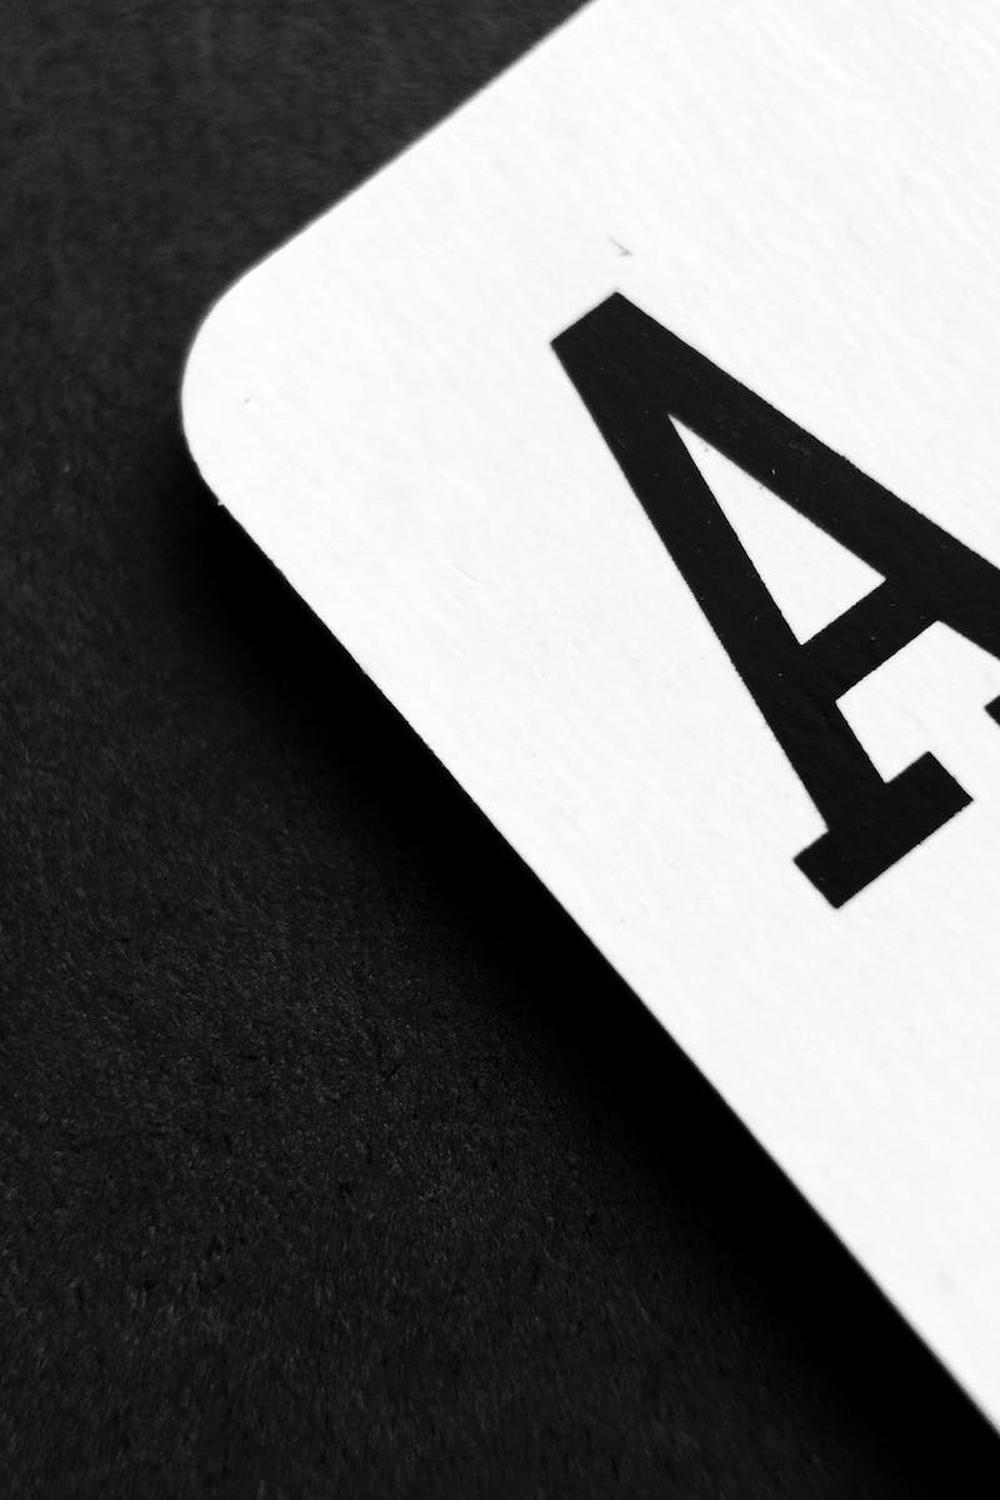  ace_of_spade_playing_card_on_grey_surface